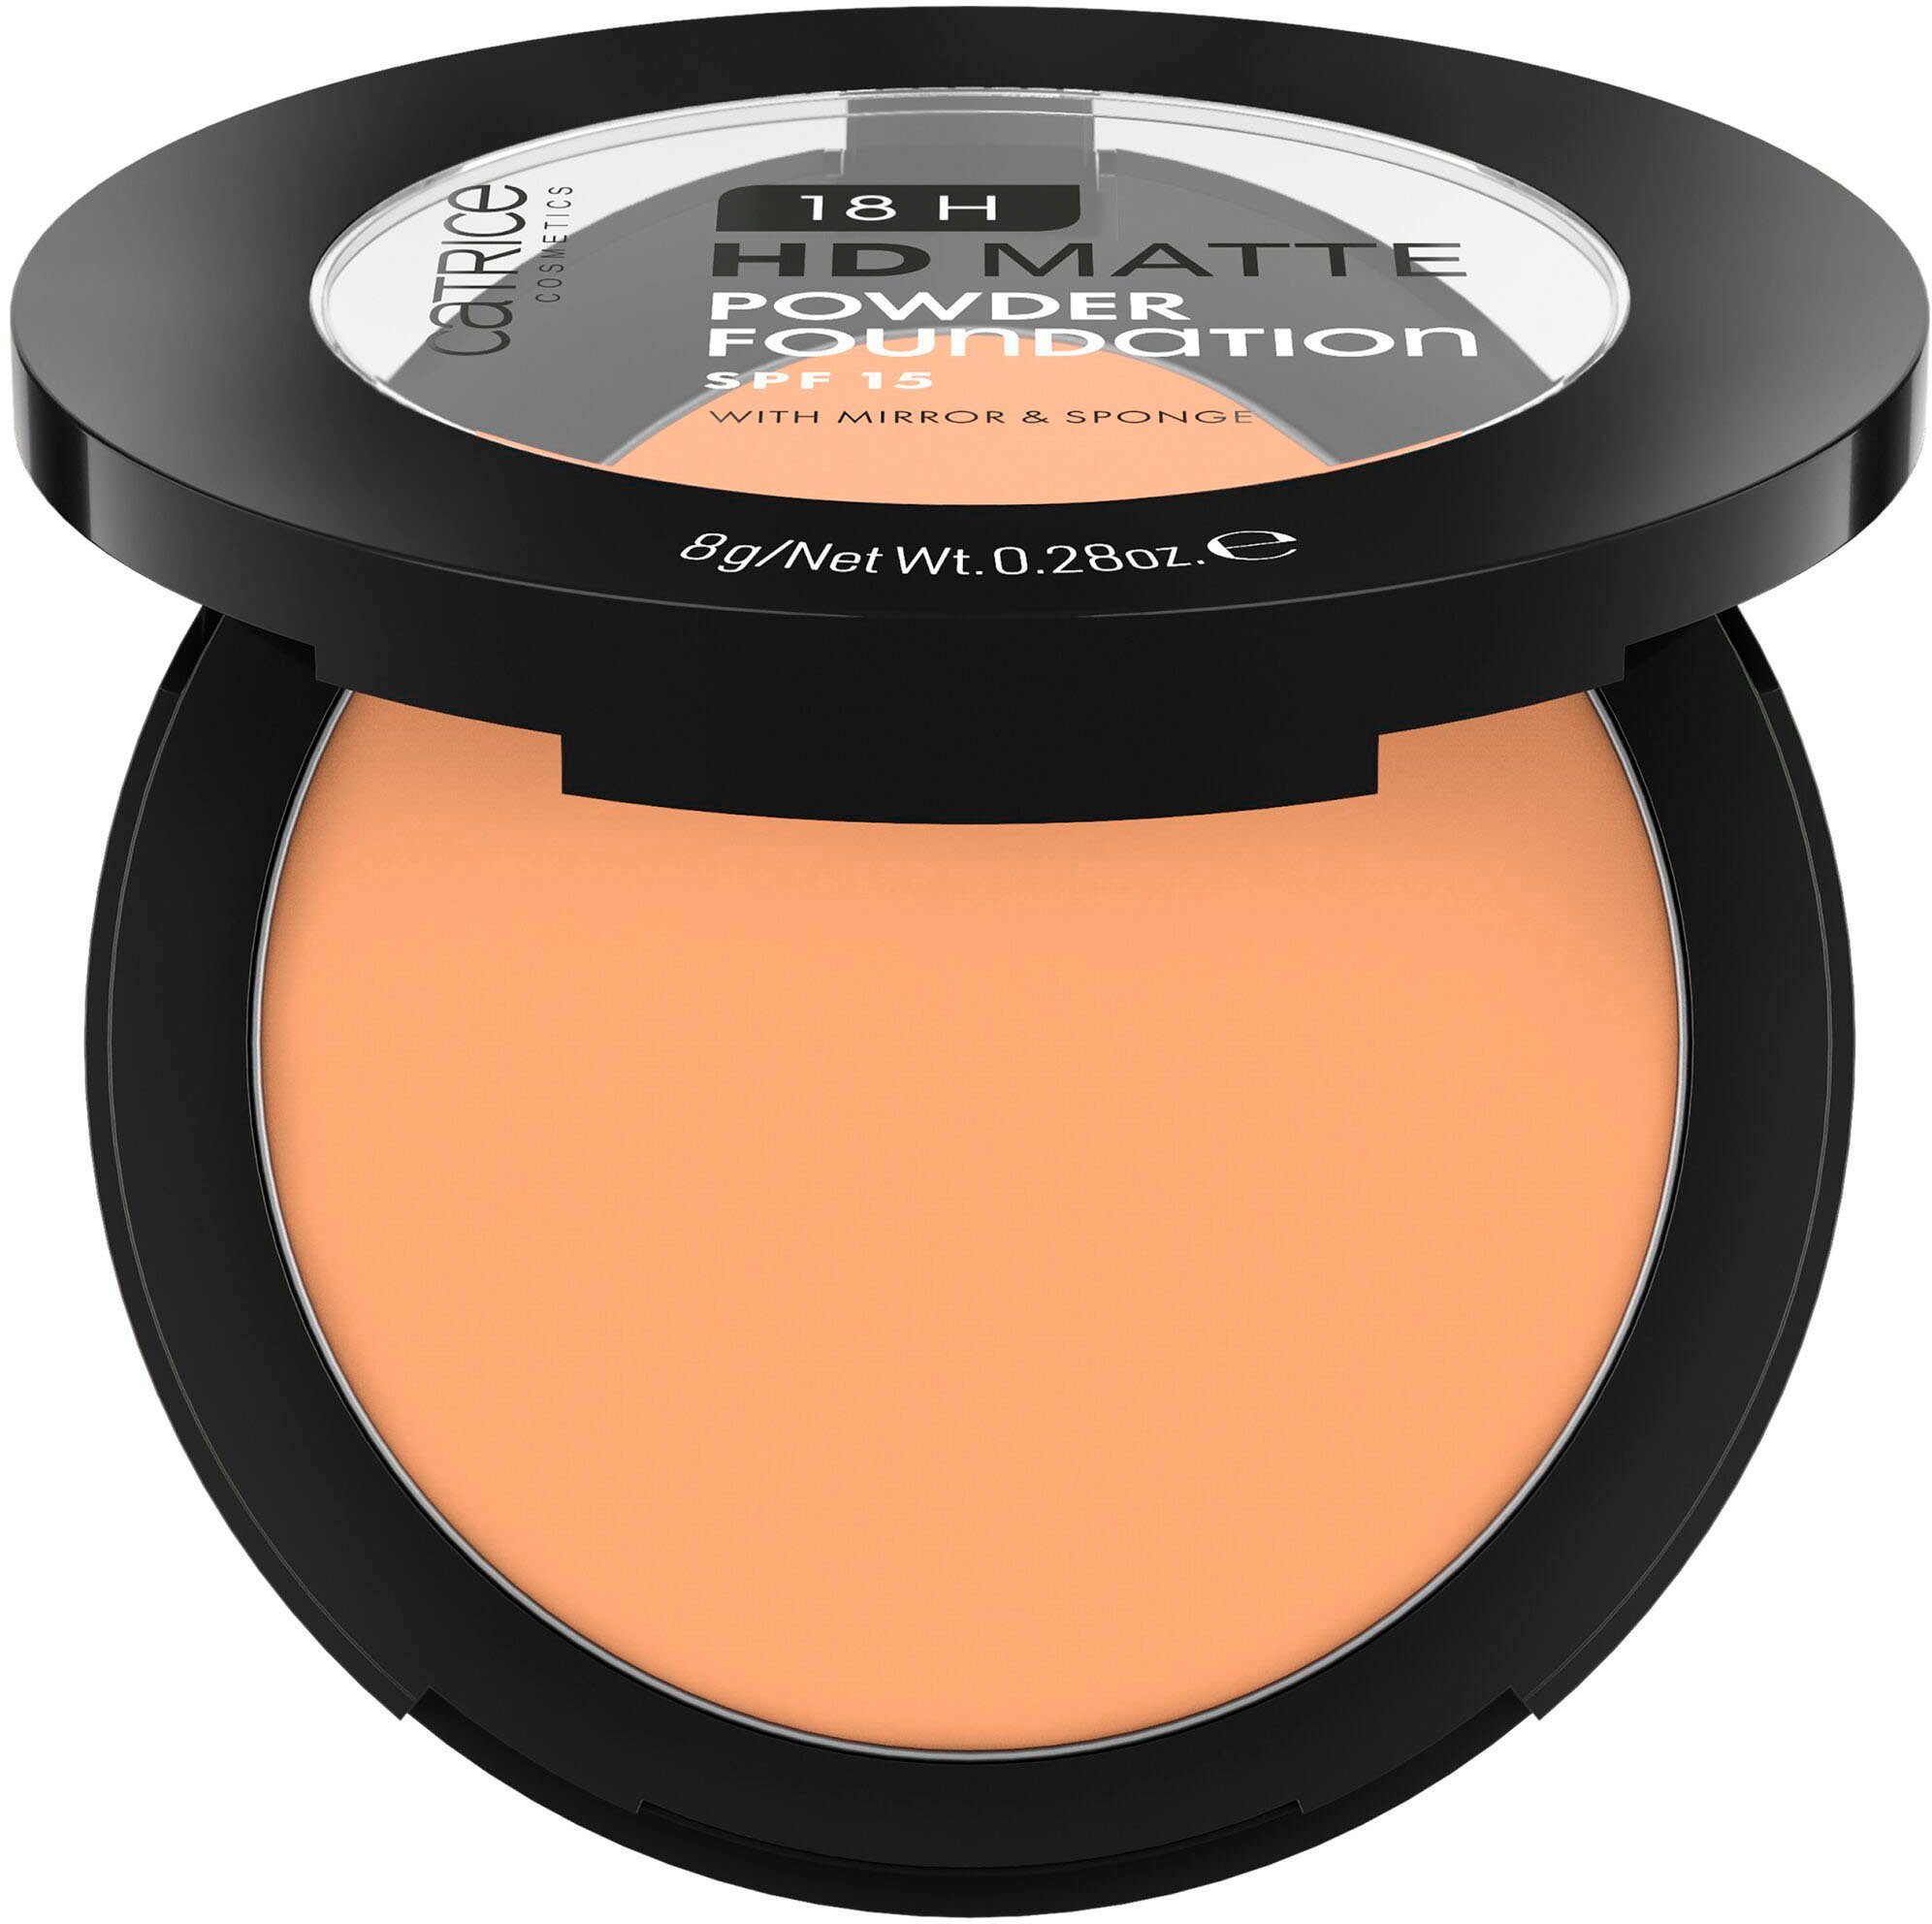 Puder 3-tlg. Powder Foundation, nude HD Matte Catrice 045N 18H